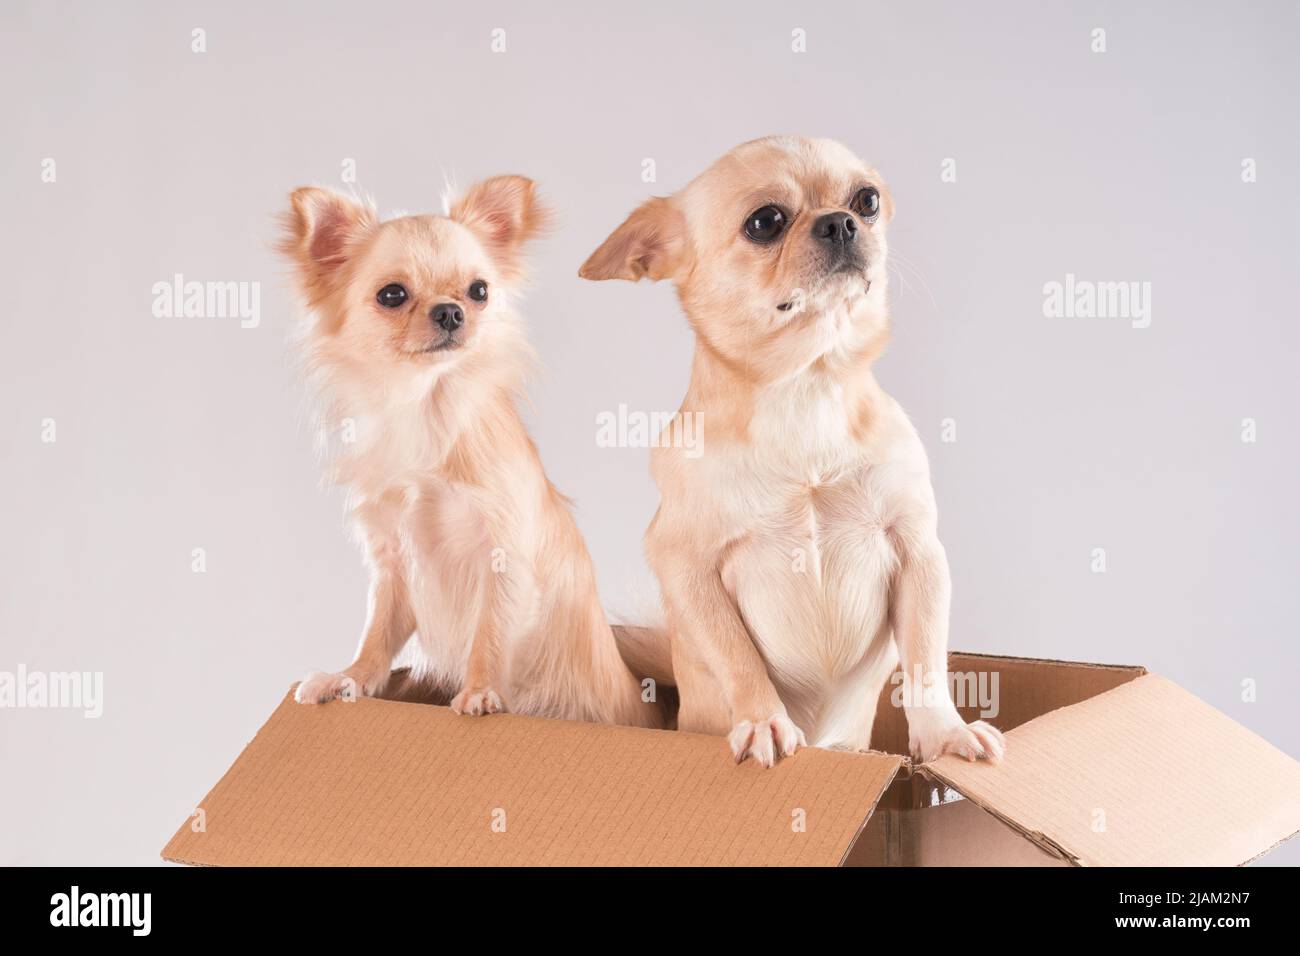 Two small cute white chihuahua dogs peeking out of a cardboard box. Studio shoot on white Stock Photo